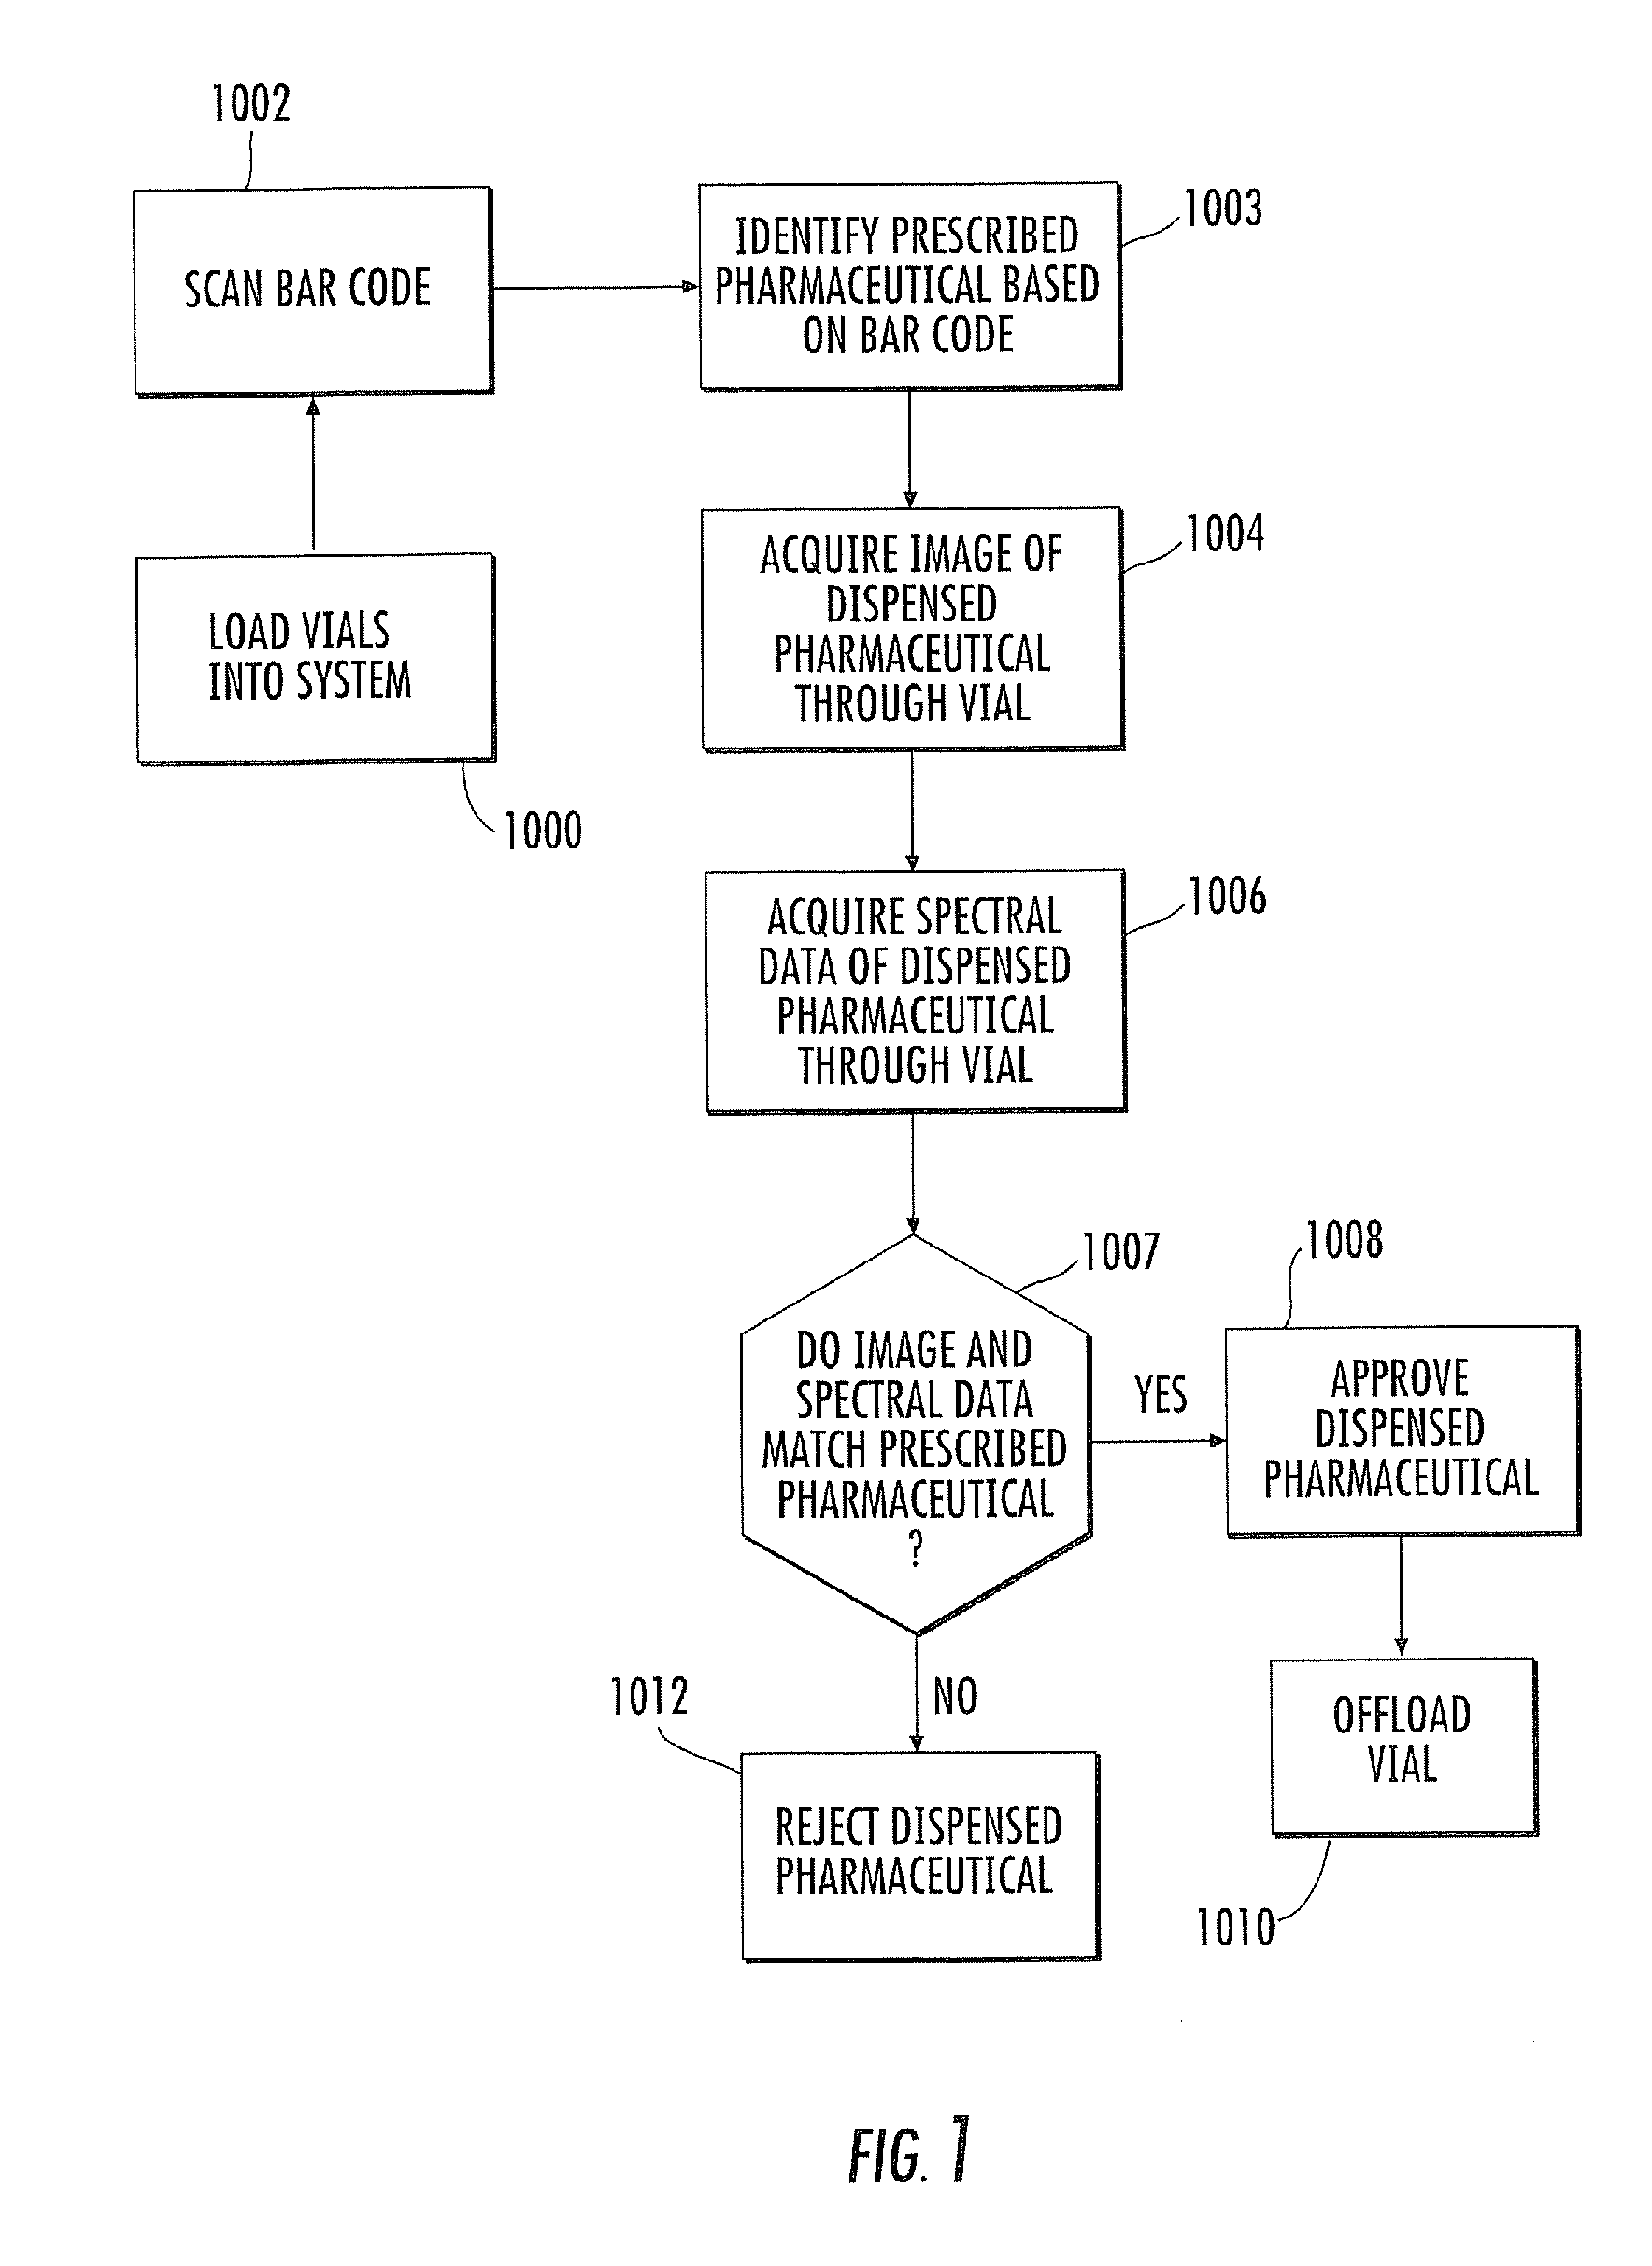 System and method for verifying the contents of a filled, capped pharmaceutical prescription